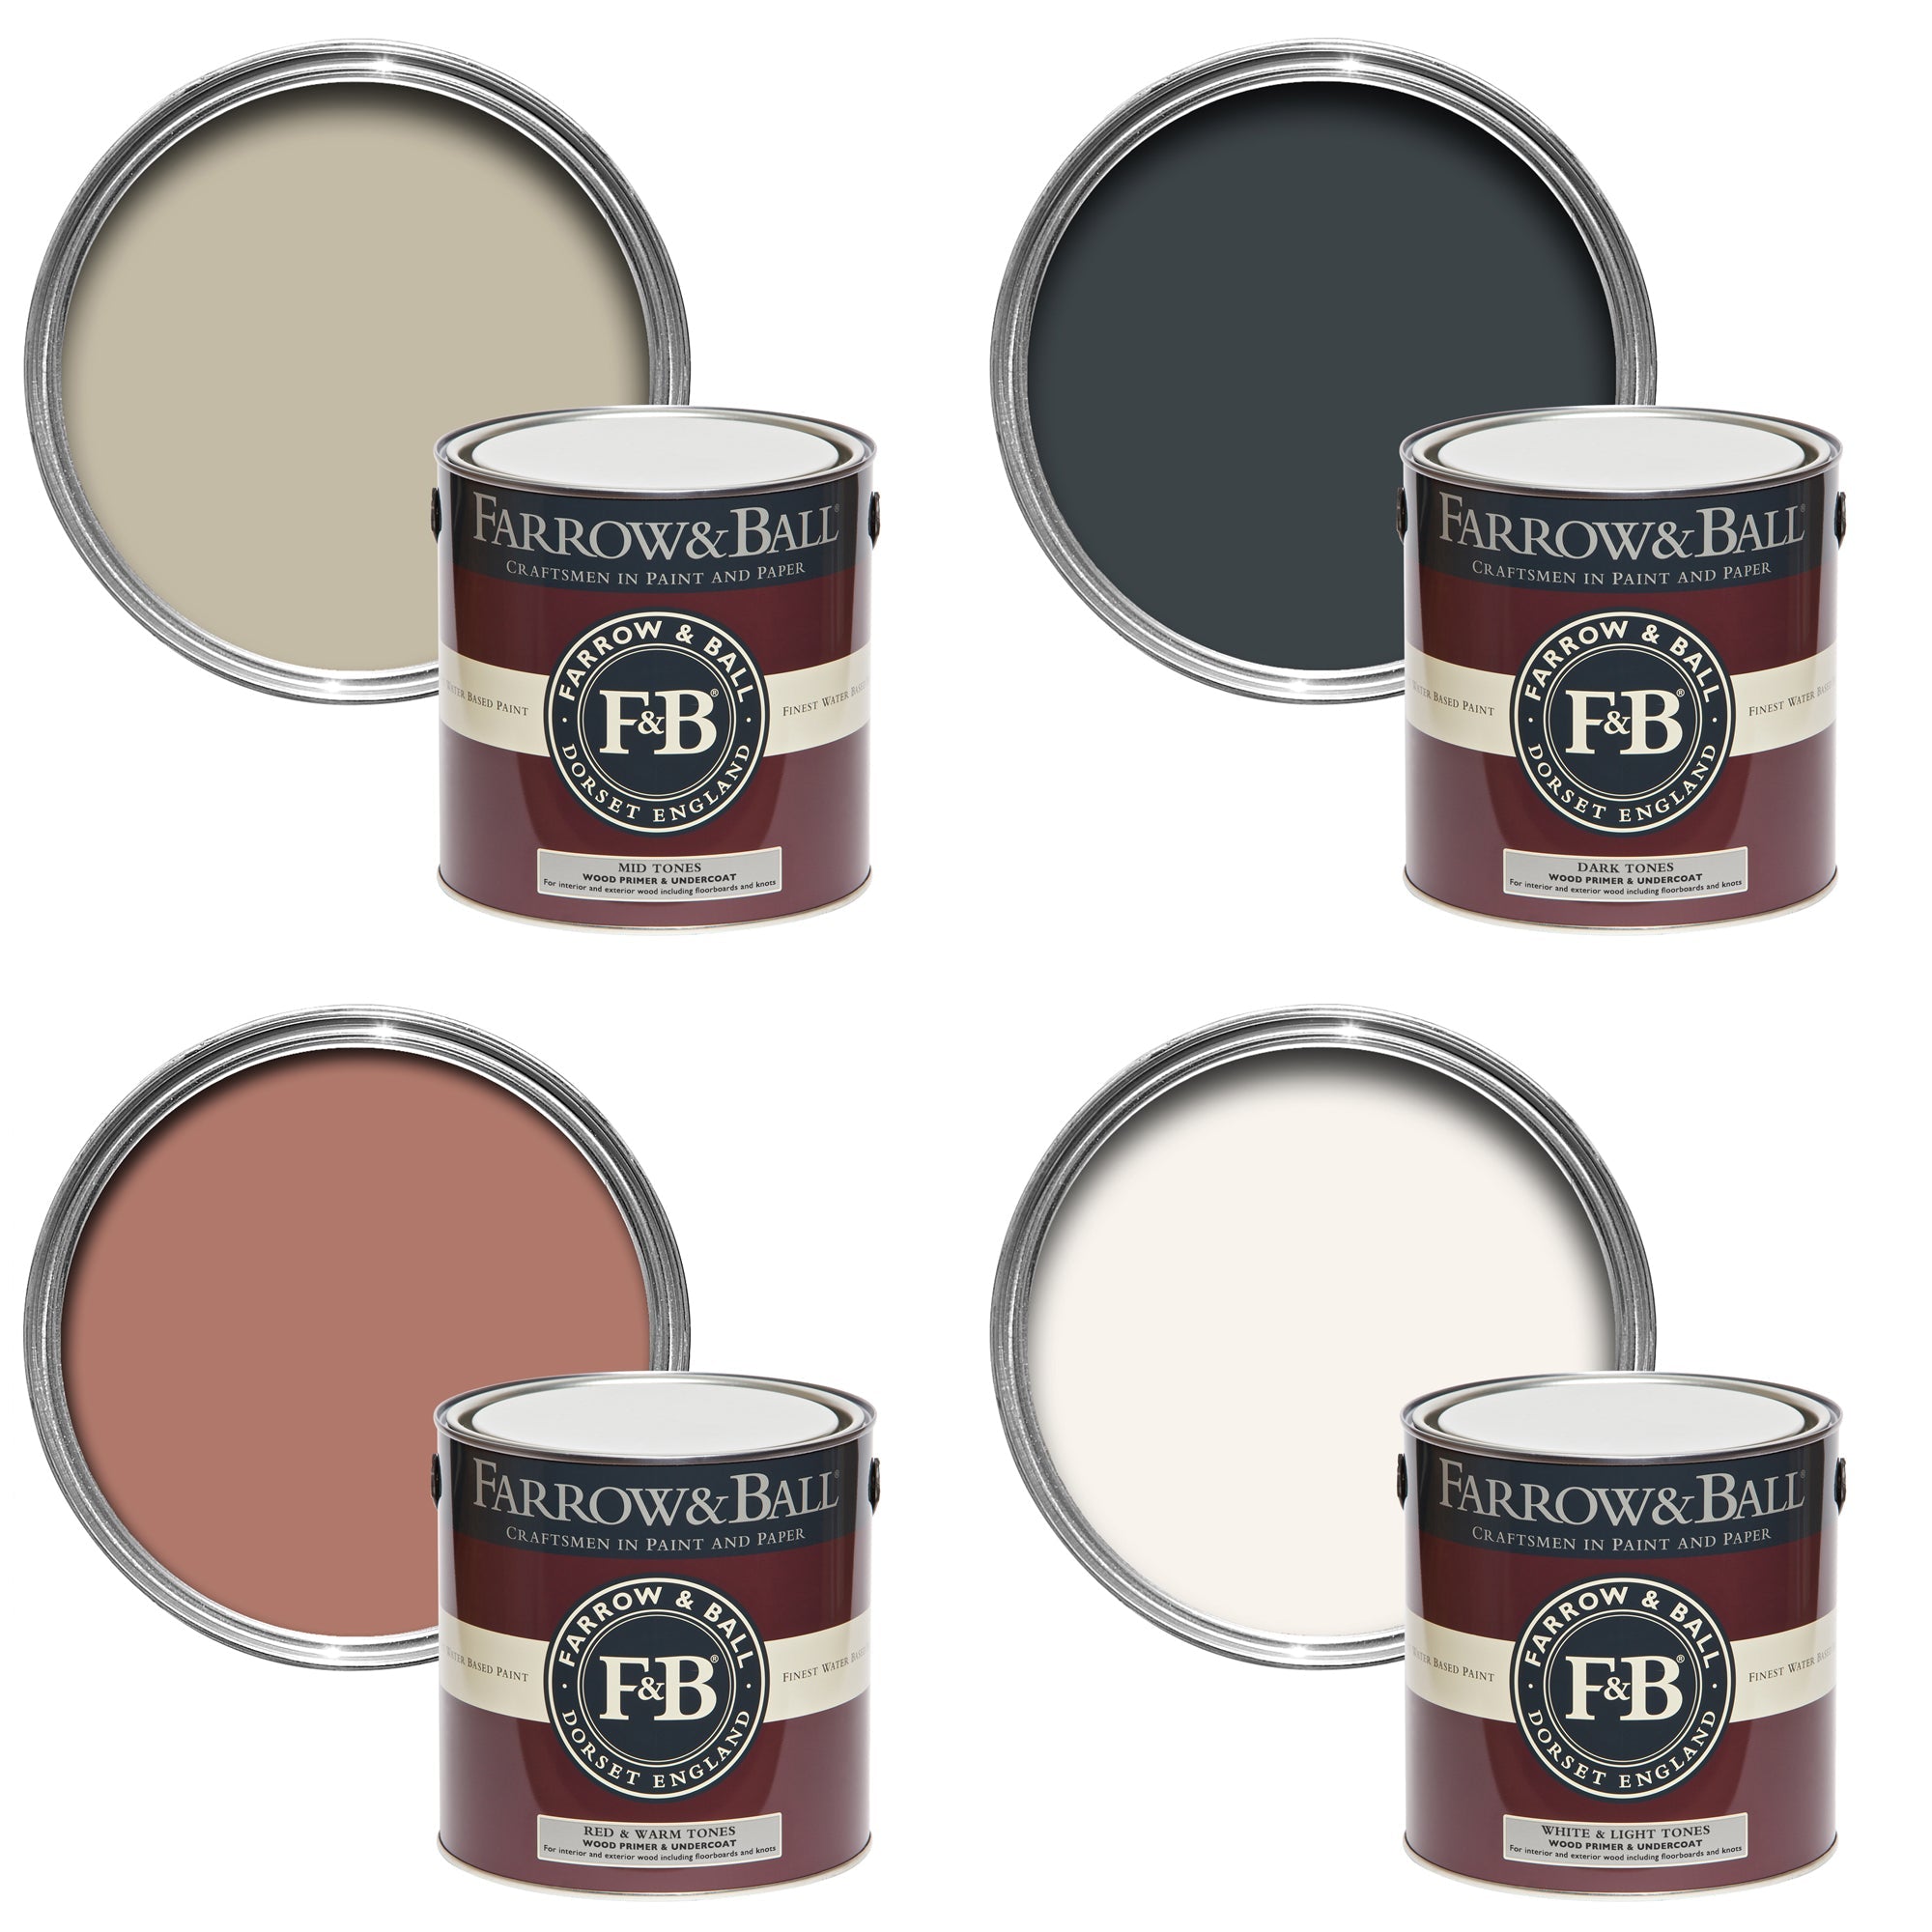 Farrow and Ball Wood Primer and Undercoat